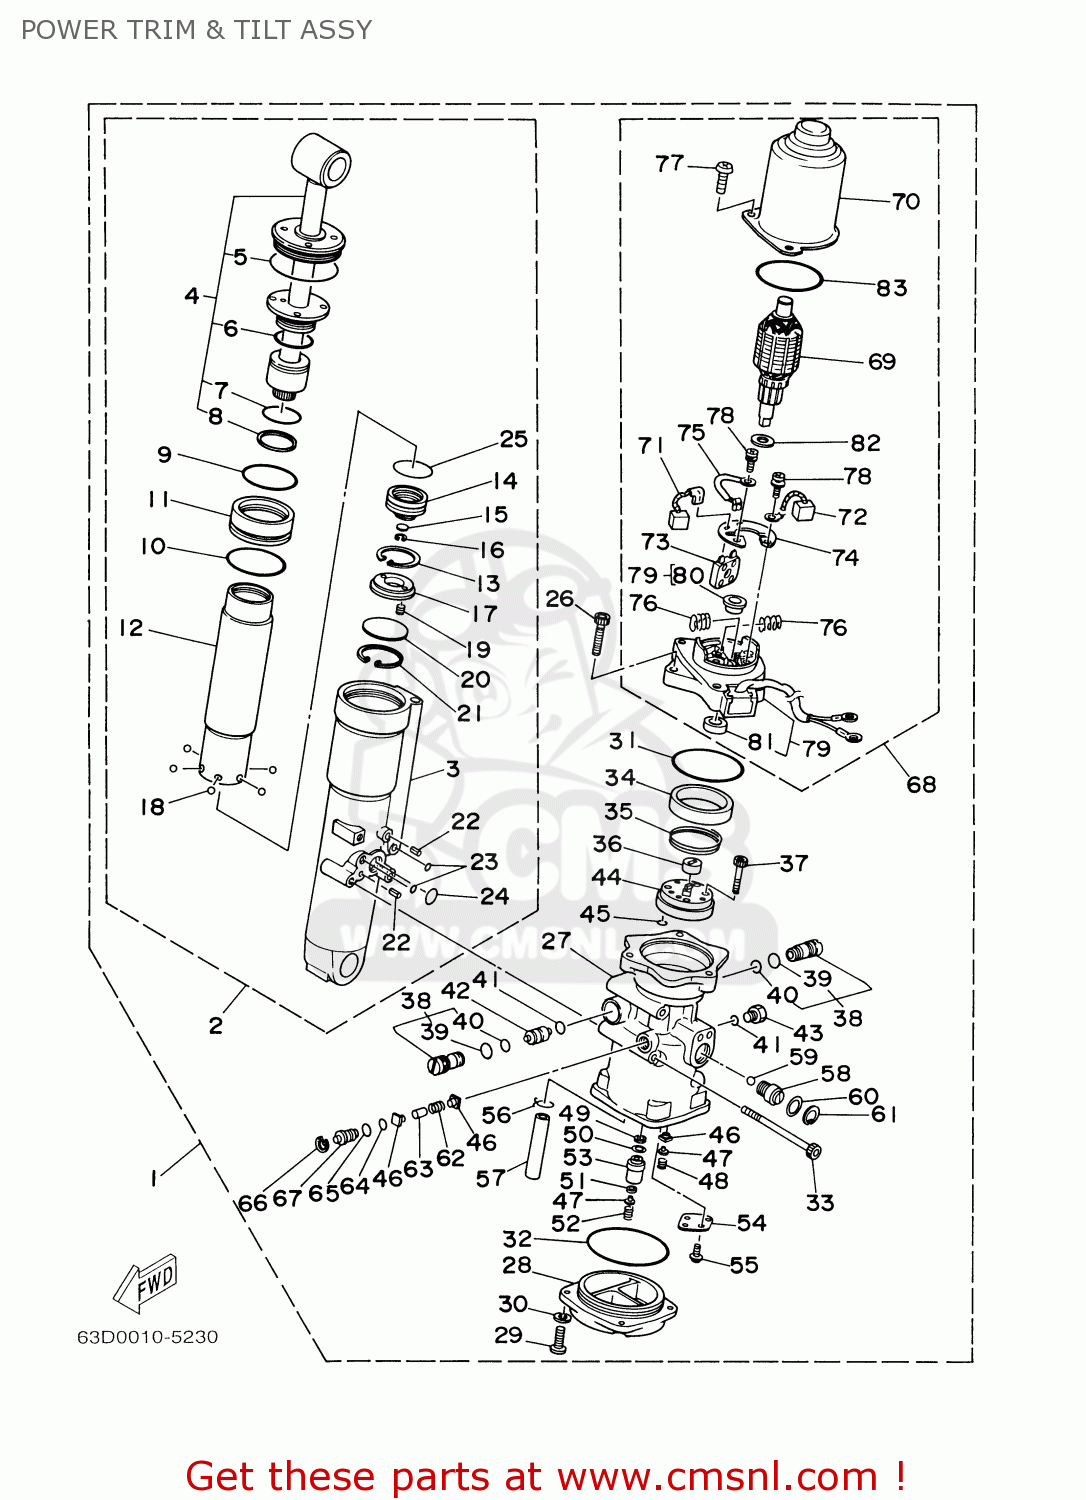 Yamaha F50/t50tlry 2000 Power Trim & Tilt Assy - schematic ... 25 hp 2 cylinder mercury outboard wiring diagram 